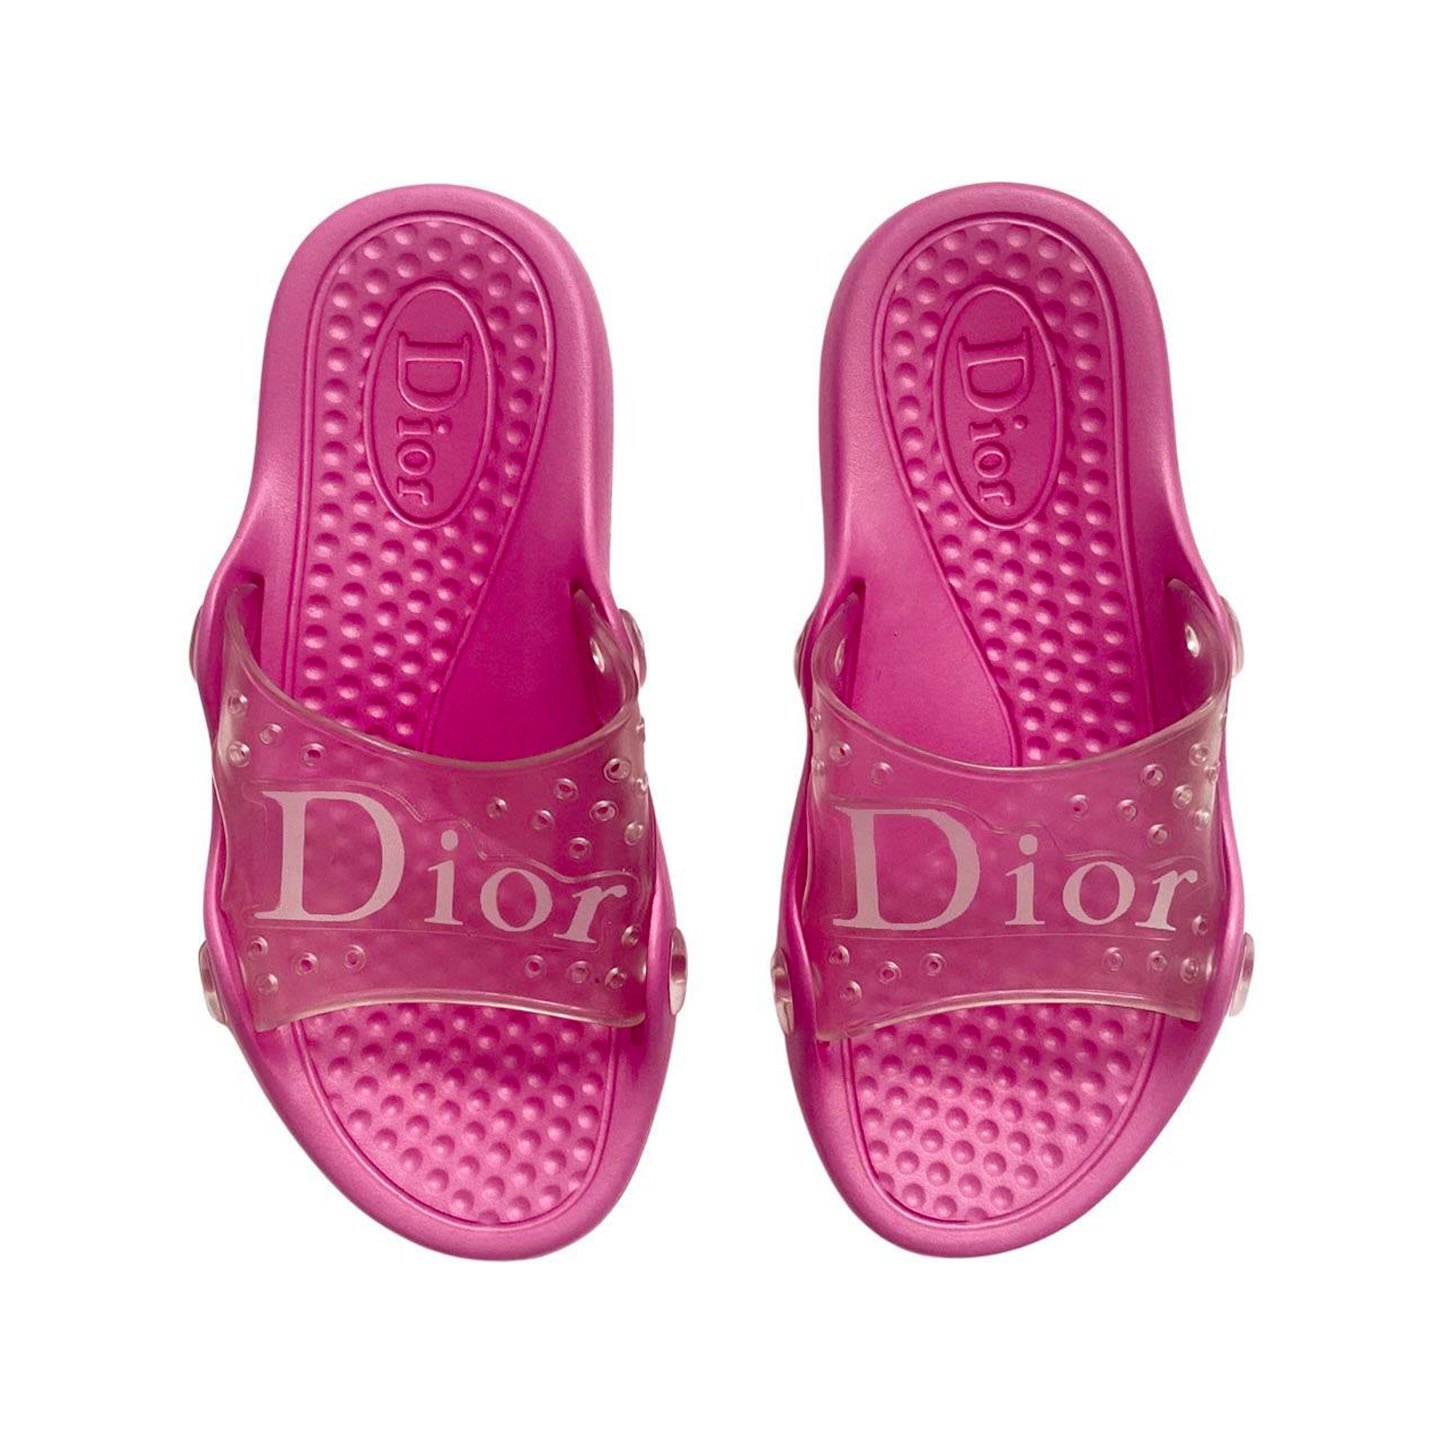 Christian Dior Bright Pink Dway Toile De Jouy Embroidered Slide Sandal   The Closet